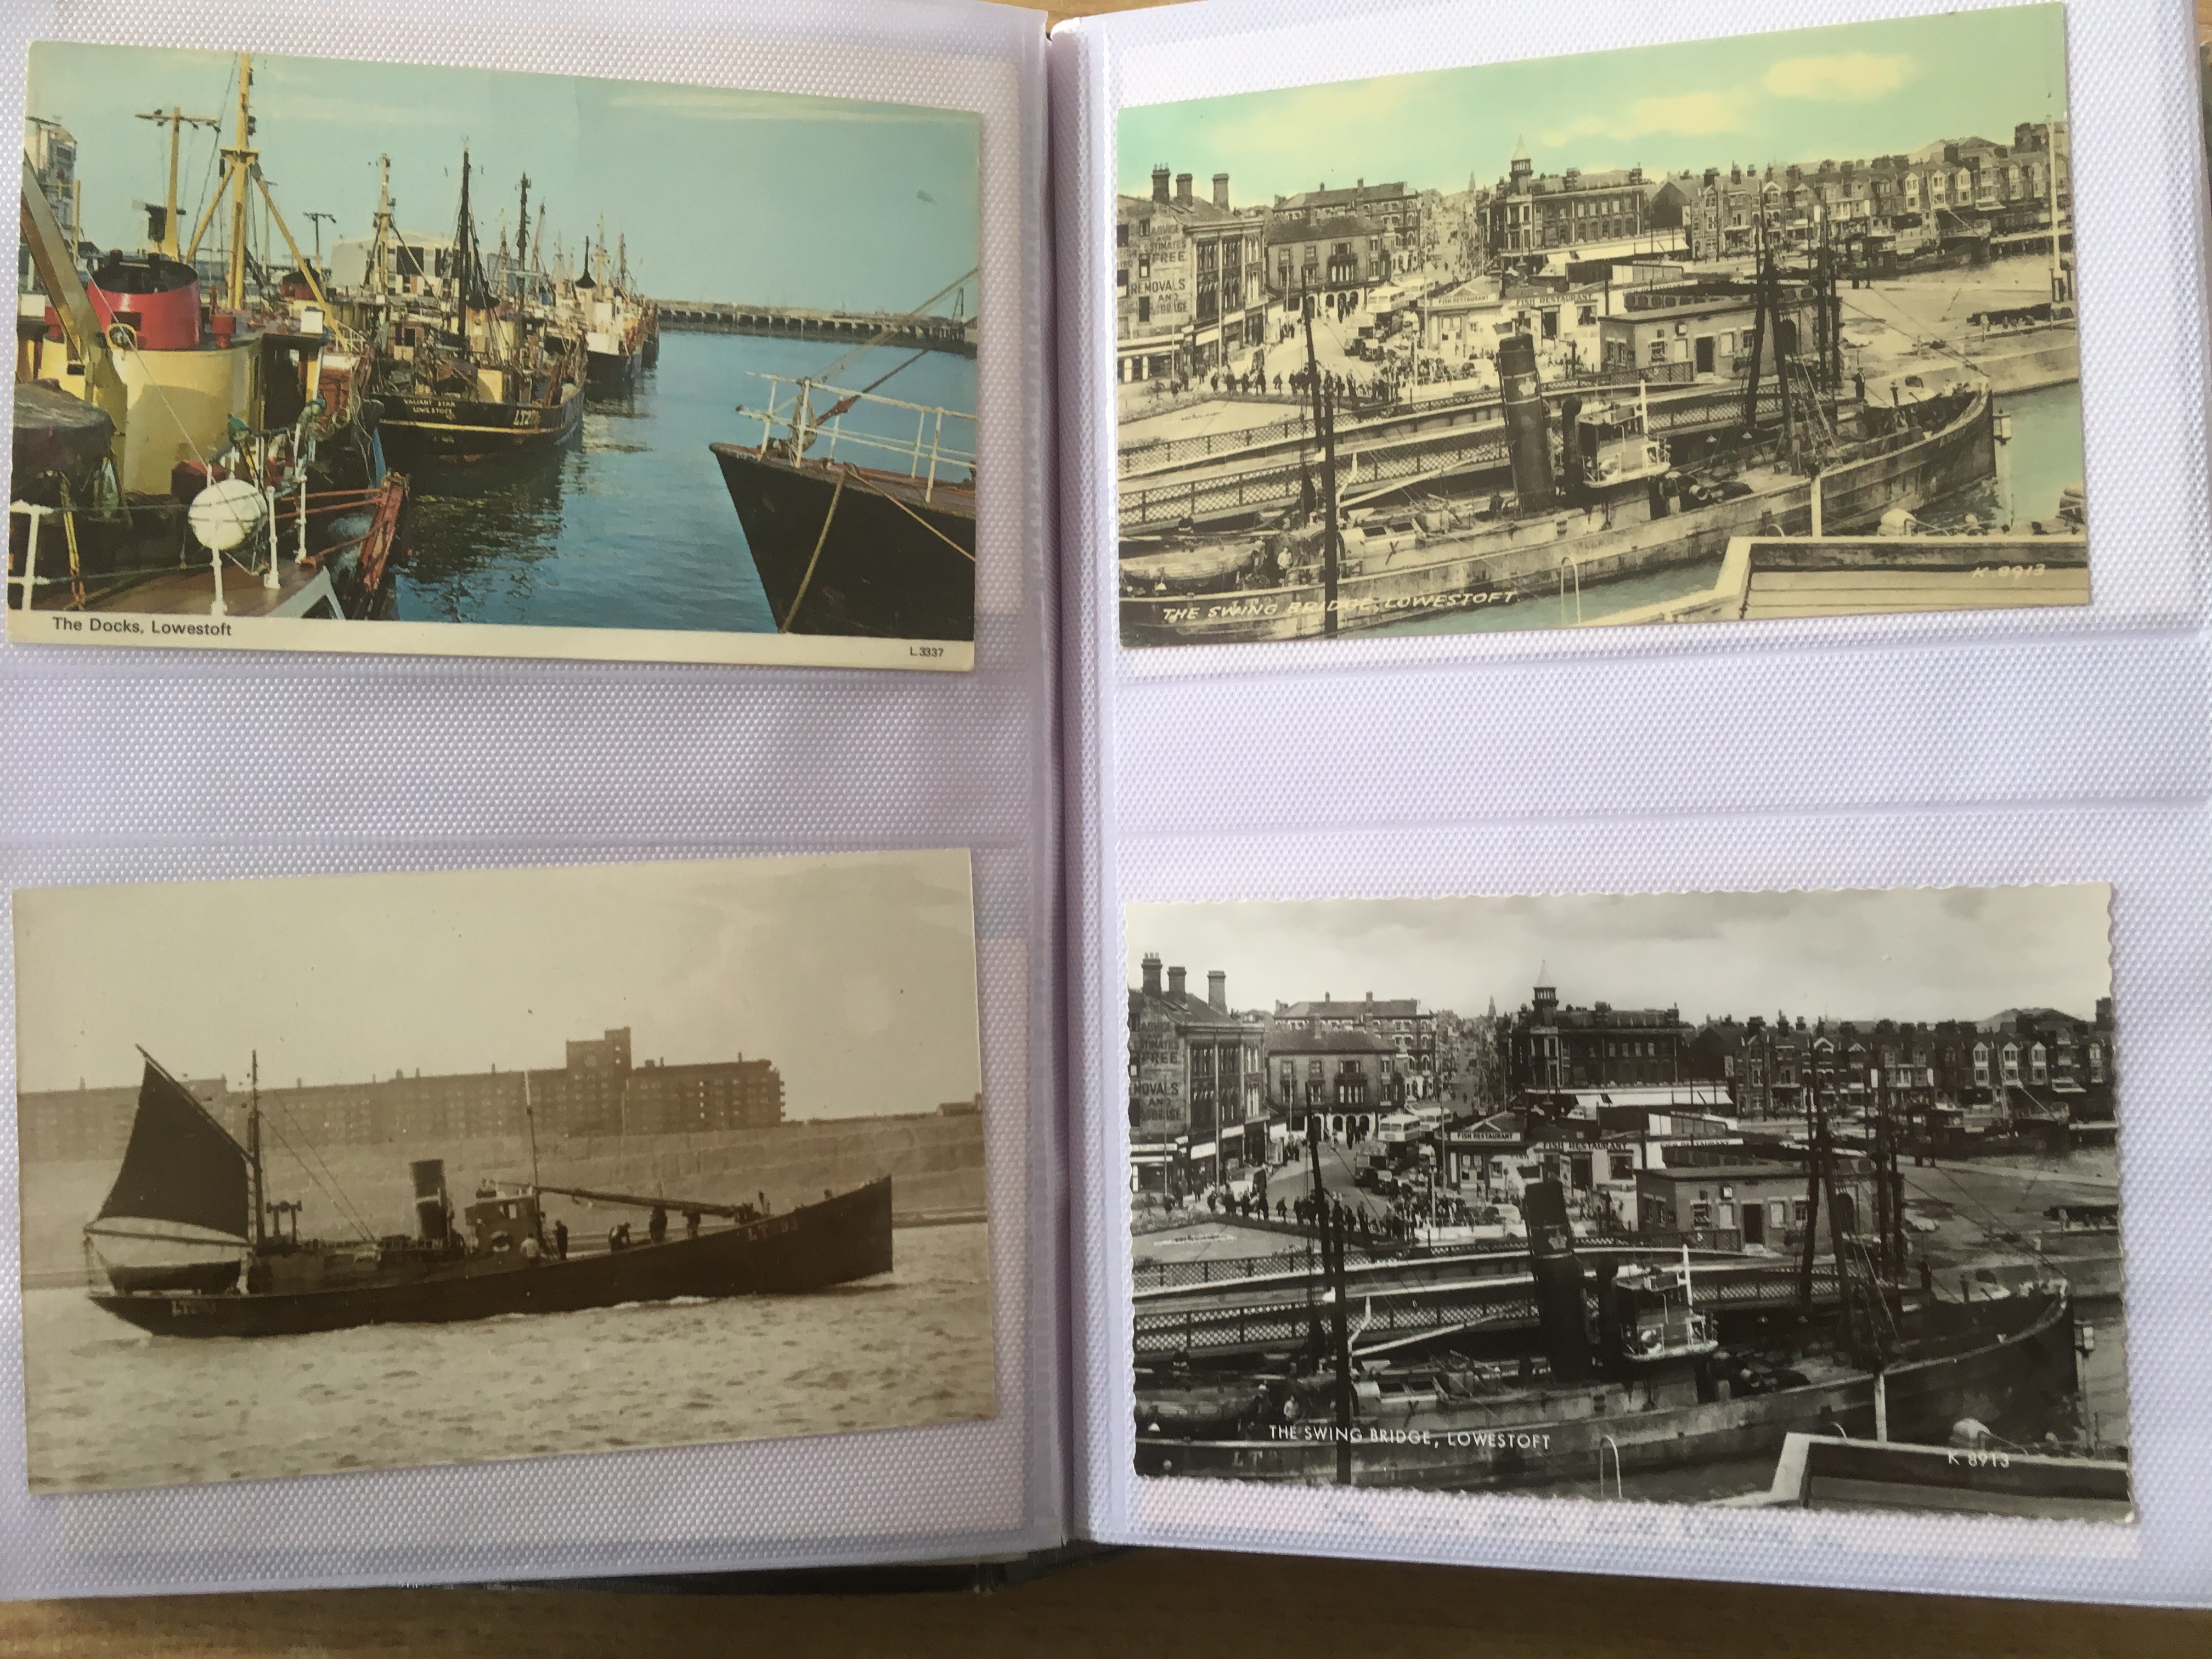 SUFFOLK: ALBUM WITH A COLLECTION OF LOWESTOFT FISHING INDUSTRY POSTCARDS, HARBOUR, TRAWLERS, - Image 4 of 7